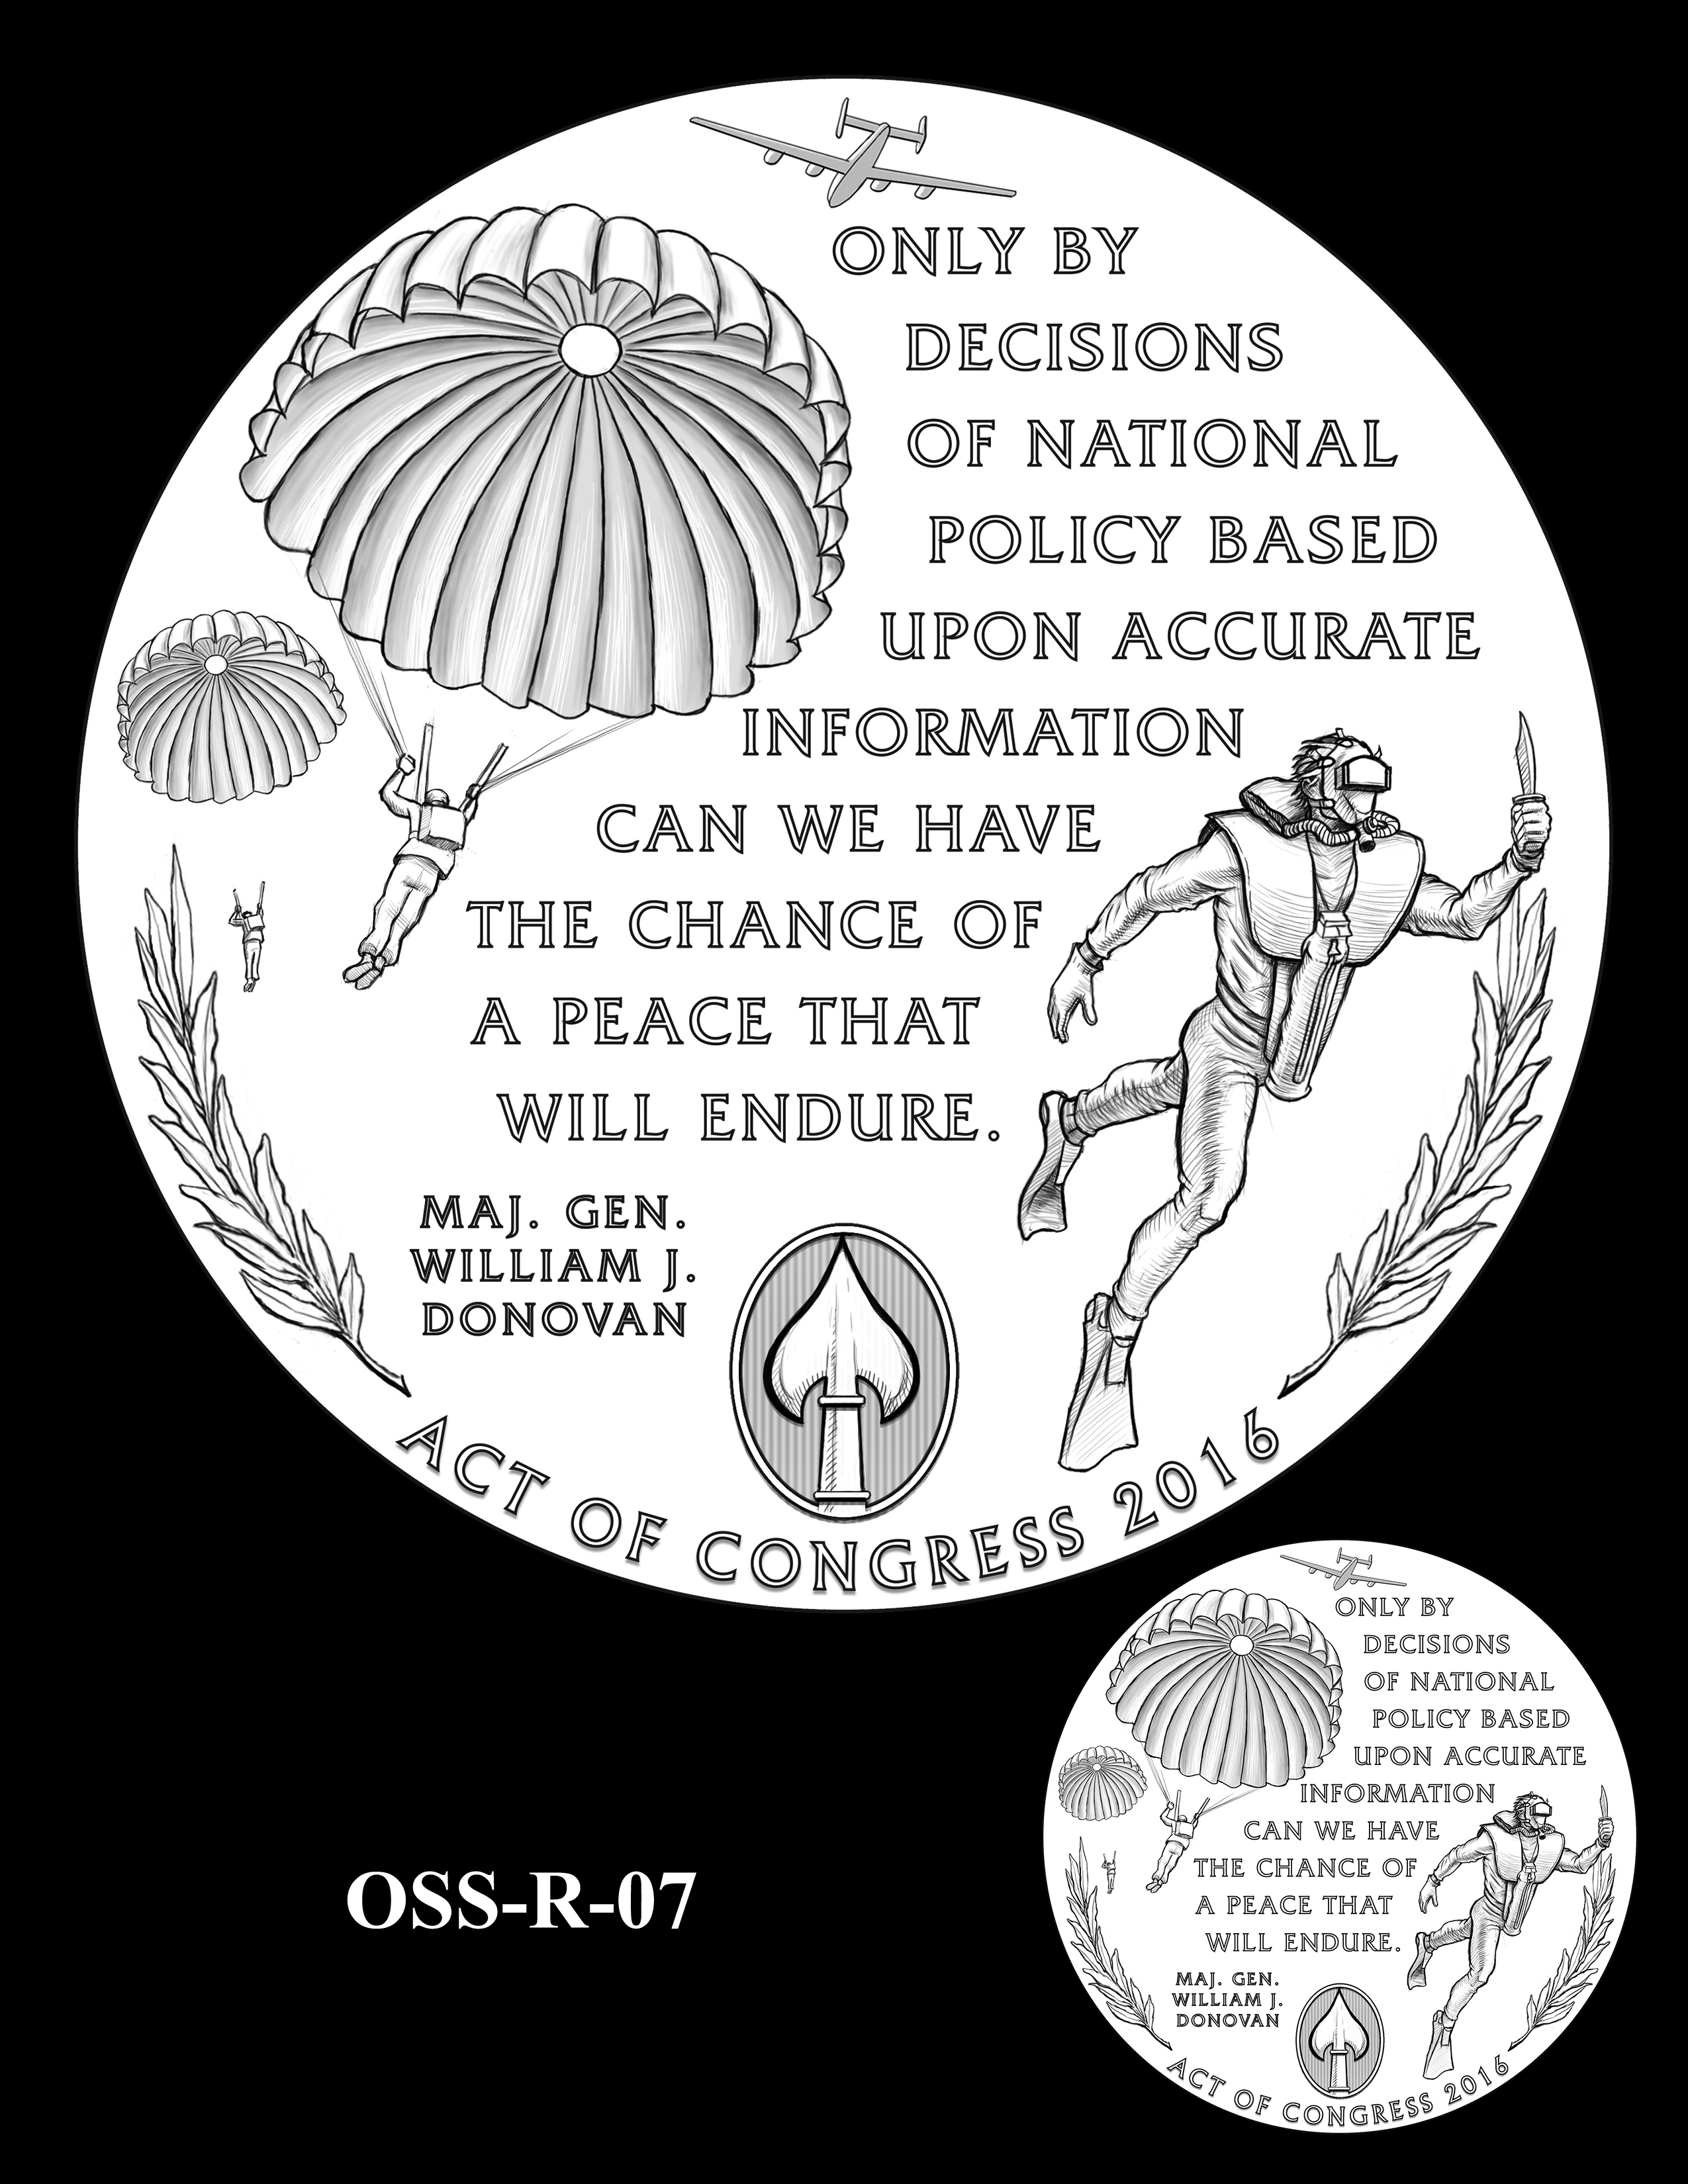 OSS-R-07 -- Office of Strategic Services Congressional Gold Medal